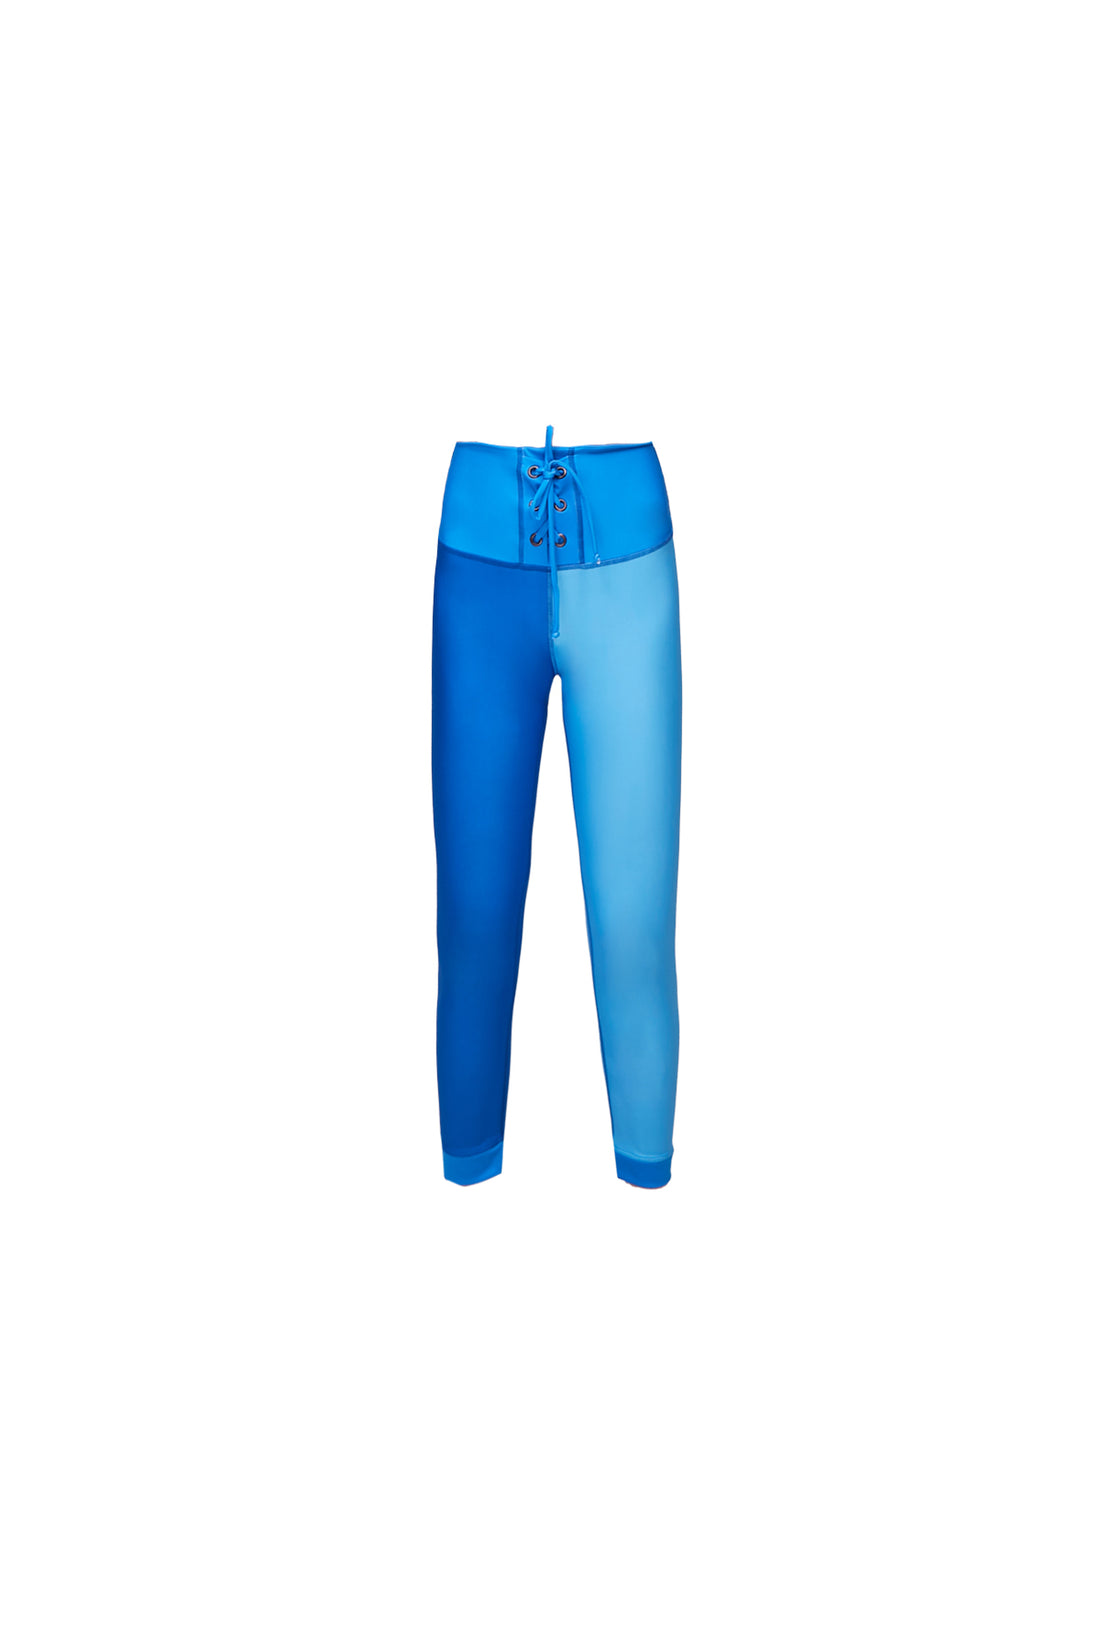 High Waist Iconic Tricolor Blue